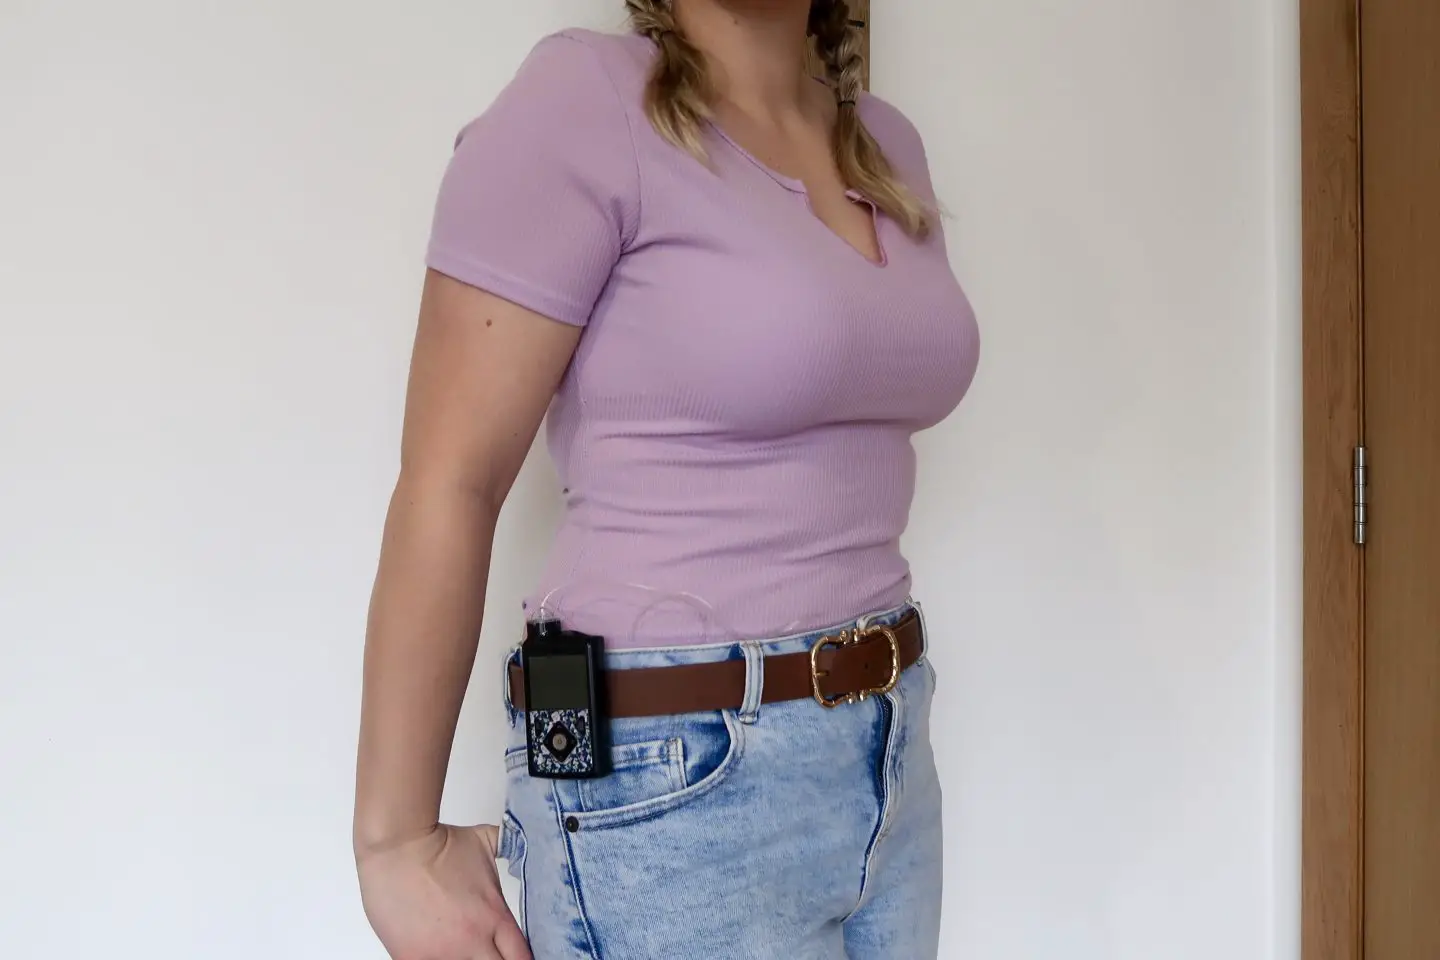 The torso of a woman wearing a lilac t-shirt and light blue jeans. She has an insulin pump on her hip and her thumbs in her back pocket.